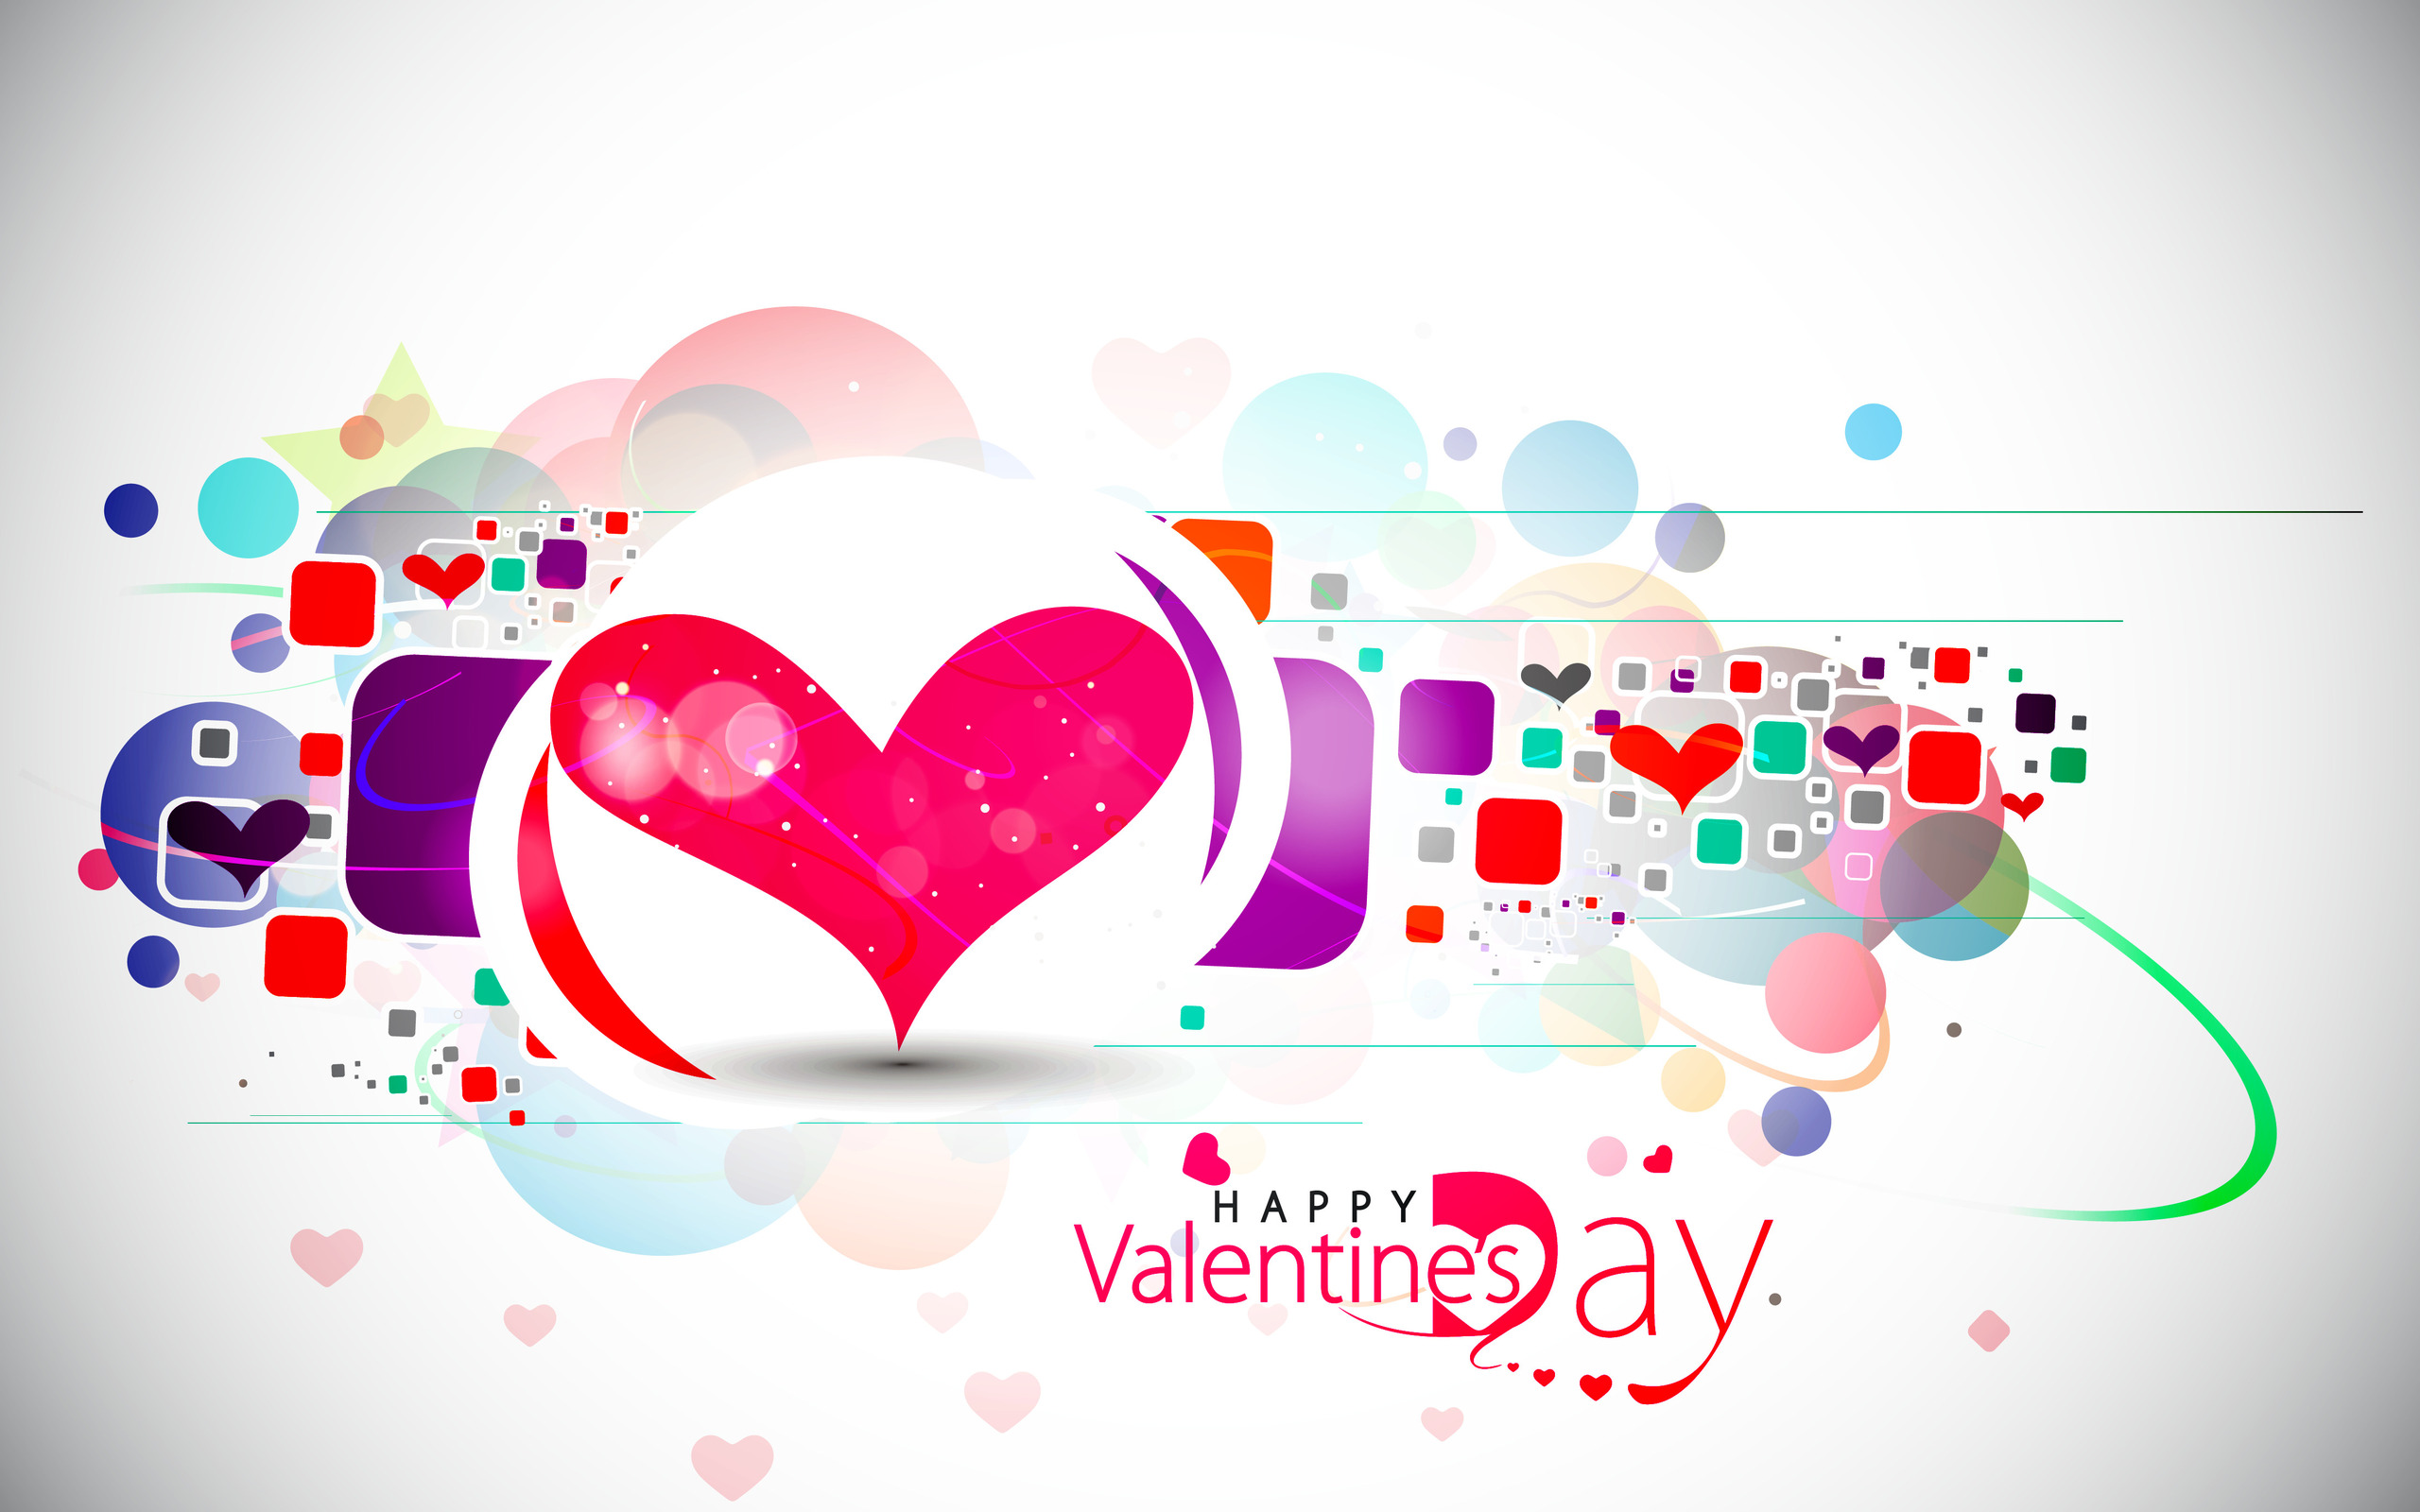 Happy Valentines Day Images Pics Photos Wallpapers